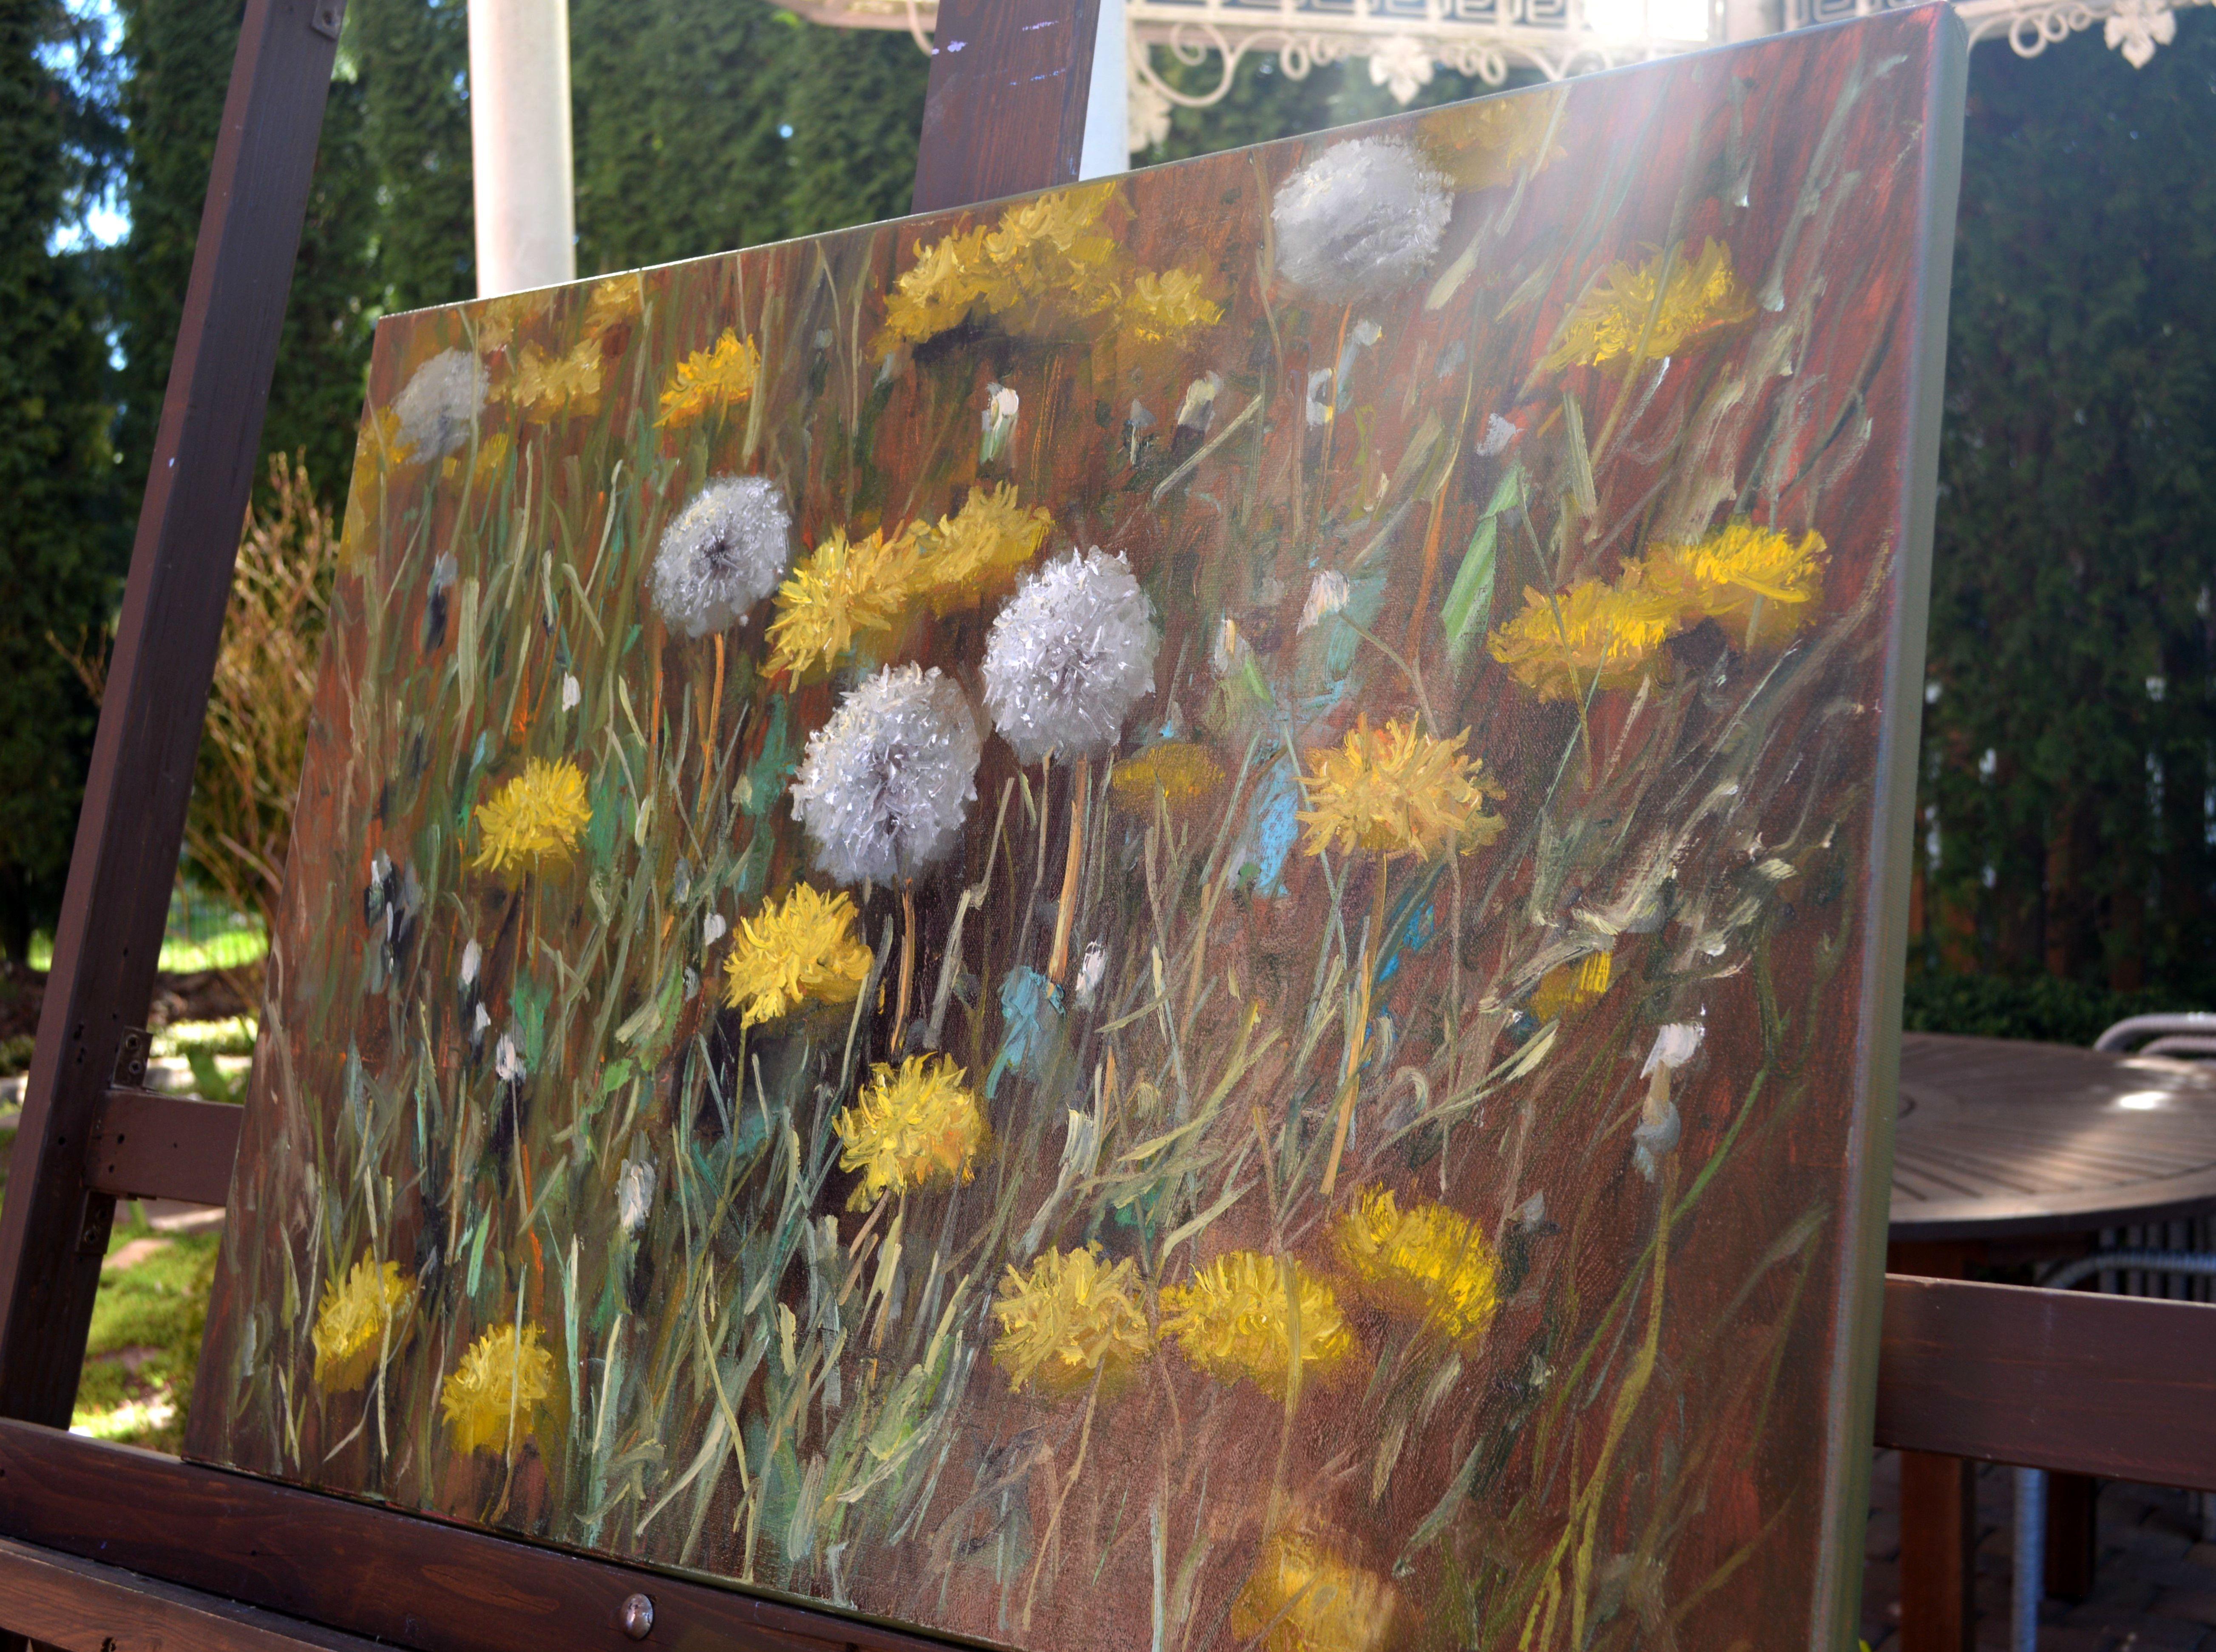 In creating this piece, I reveled in the play of light and shadow amongst the vibrant dandelions and ethereal seed heads, capturing nature's fleeting beauty. With each brushstroke, I aimed to invoke the wildness and delicacy of these spirited